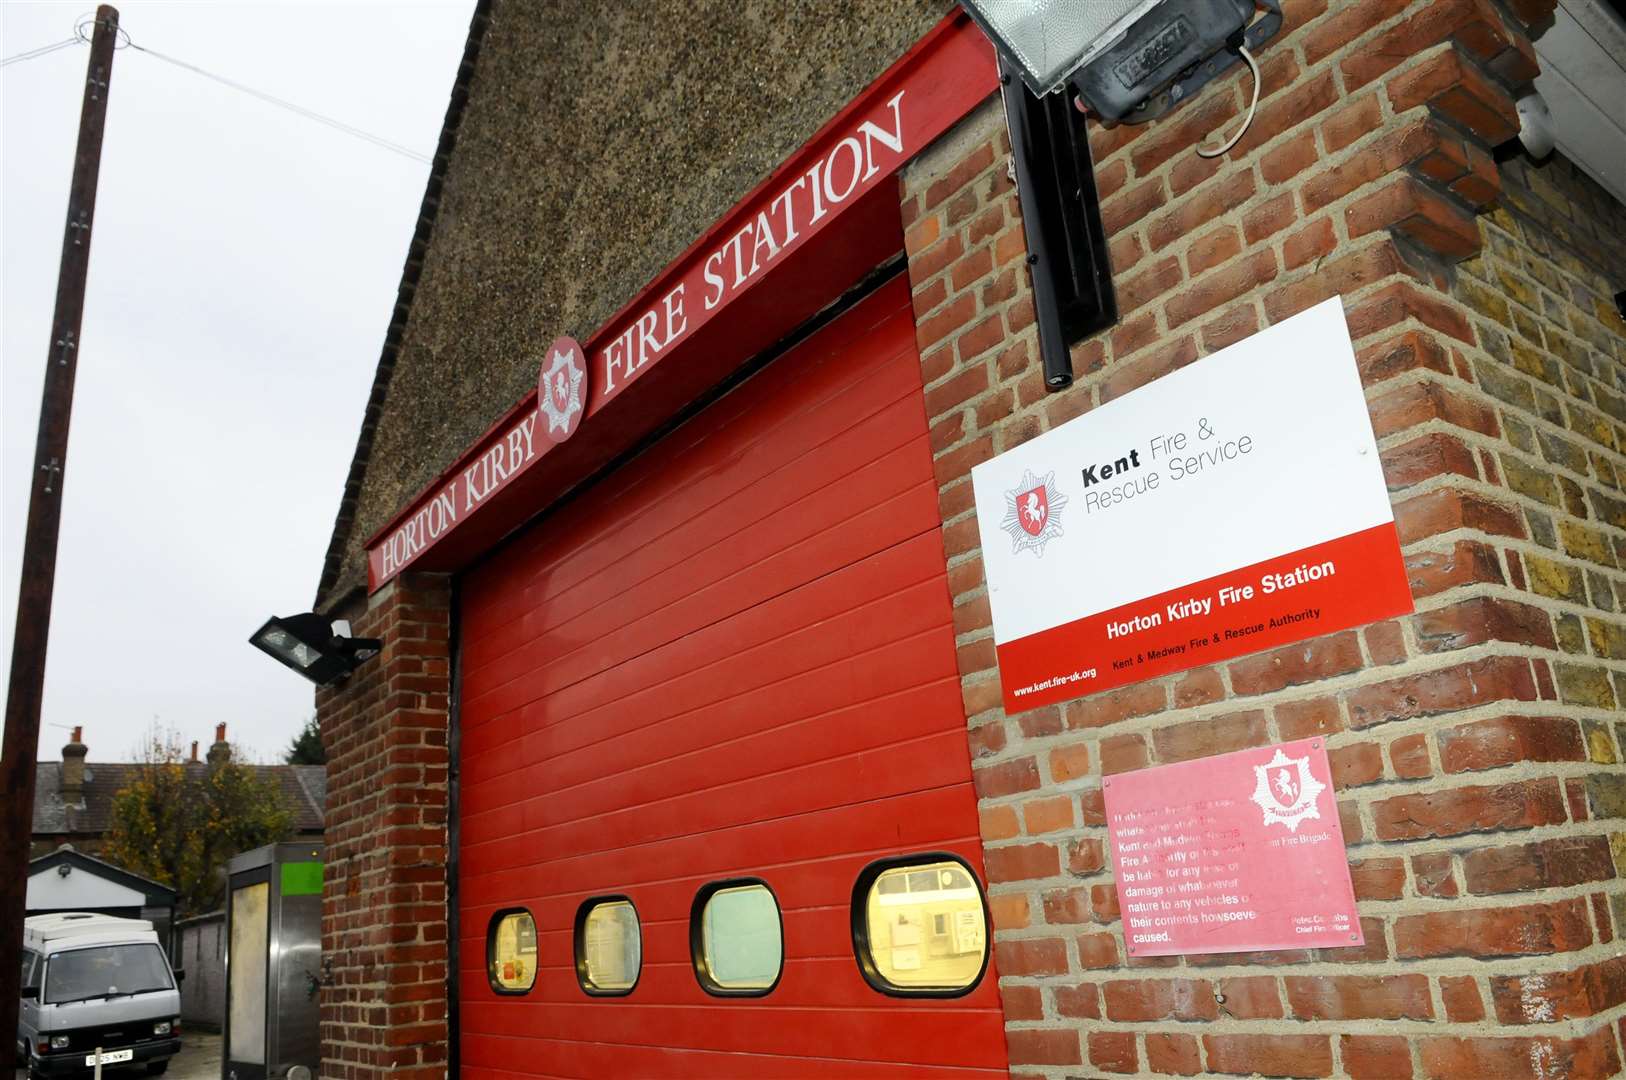 The old Horton Kirby Fire Station